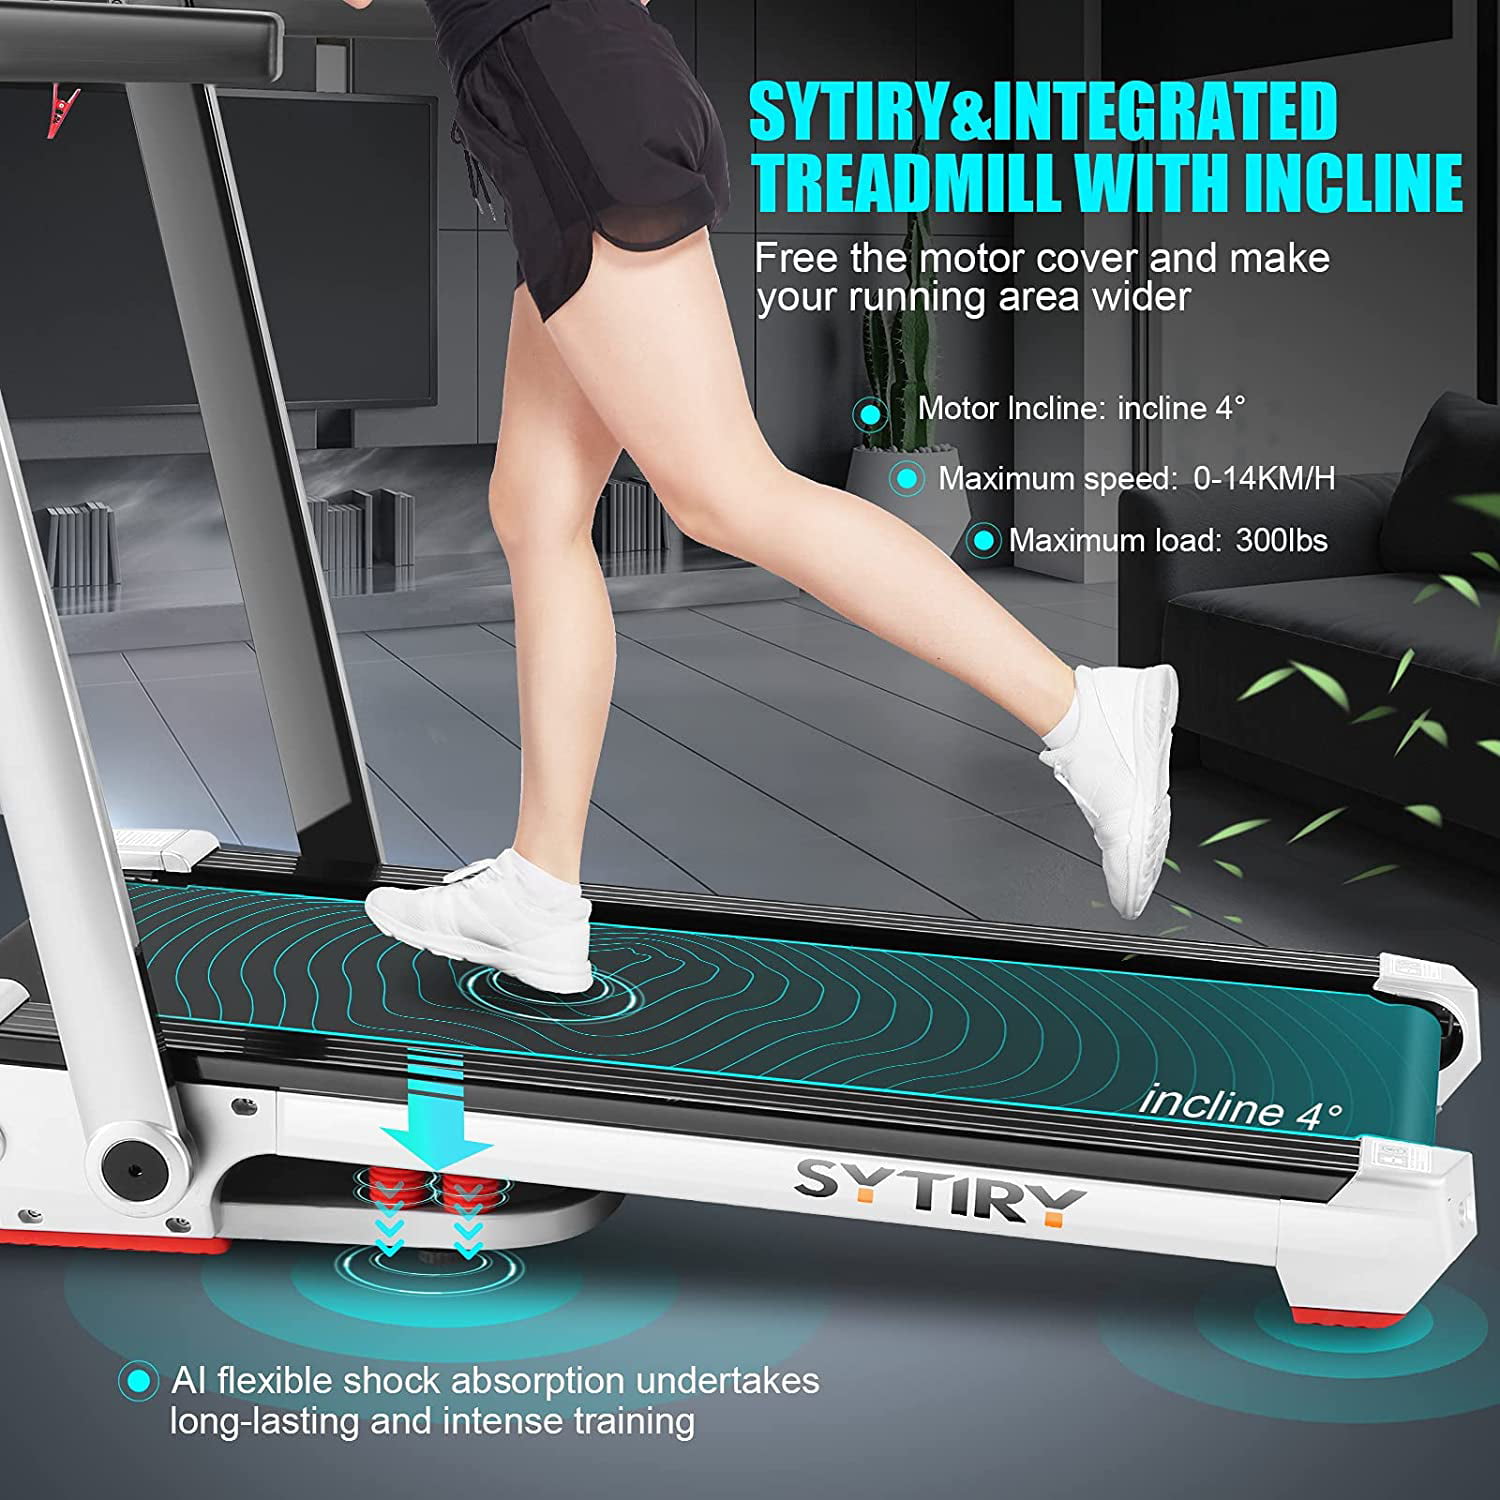 SYTIRY Treadmill with Incline for Home Folding Treadmills Fitness Exercise Machine with Multifunction Display Walking Running Jogging Treadmills for Gym & Office Workout 